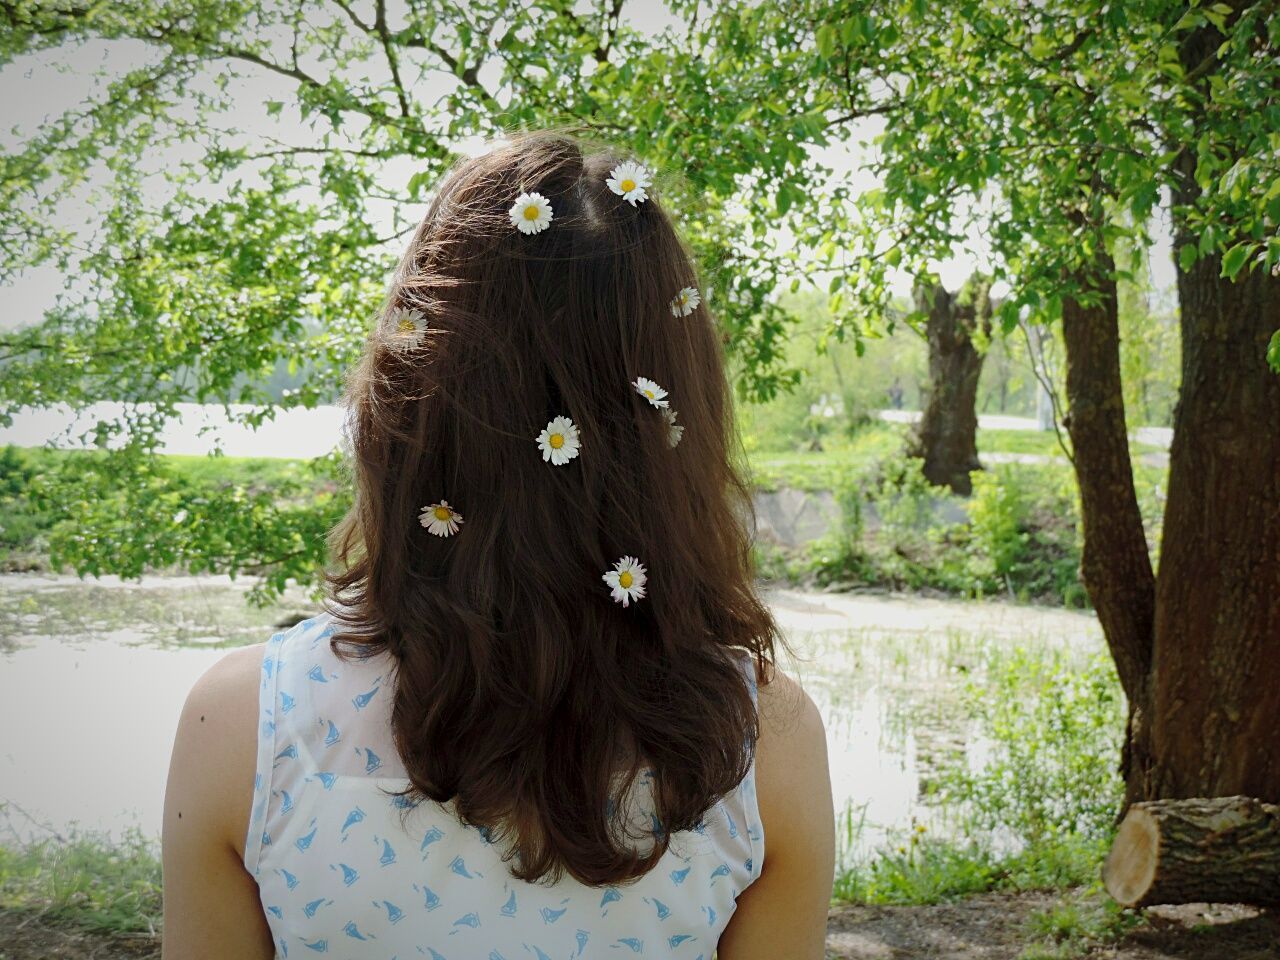 long hair, one person, tree, day, real people, outdoors, headshot, wearing flowers, brown hair, rear view, flower, lifestyles, leisure activity, tree trunk, women, nature, young women, only women, young adult, one woman only, people, adult, adults only